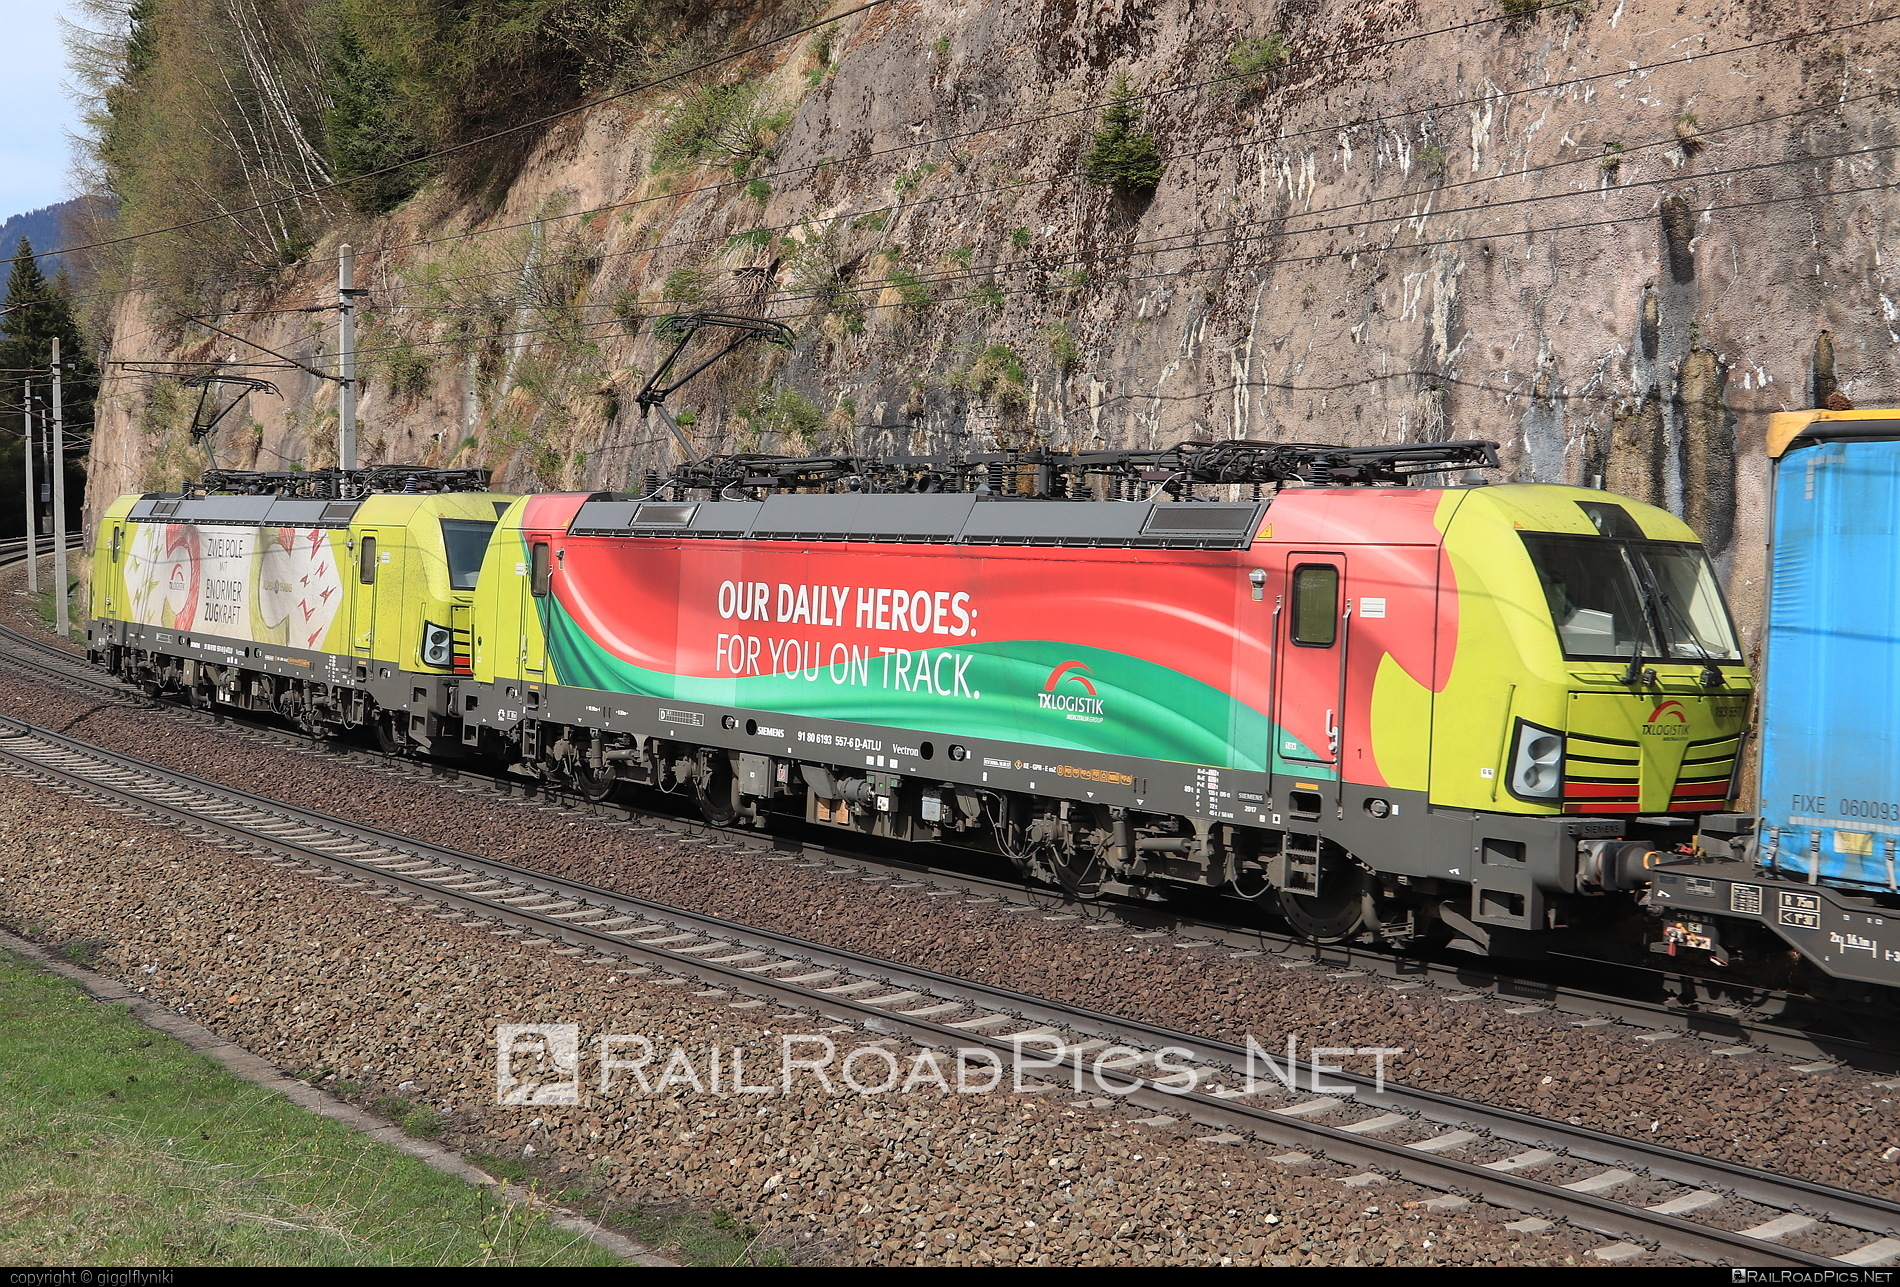 Siemens Vectron MS - 193 557 operated by TXLogistik #alphatrainsluxembourg #siemens #siemensVectron #siemensVectronMS #txlogistik #vectron #vectronMS